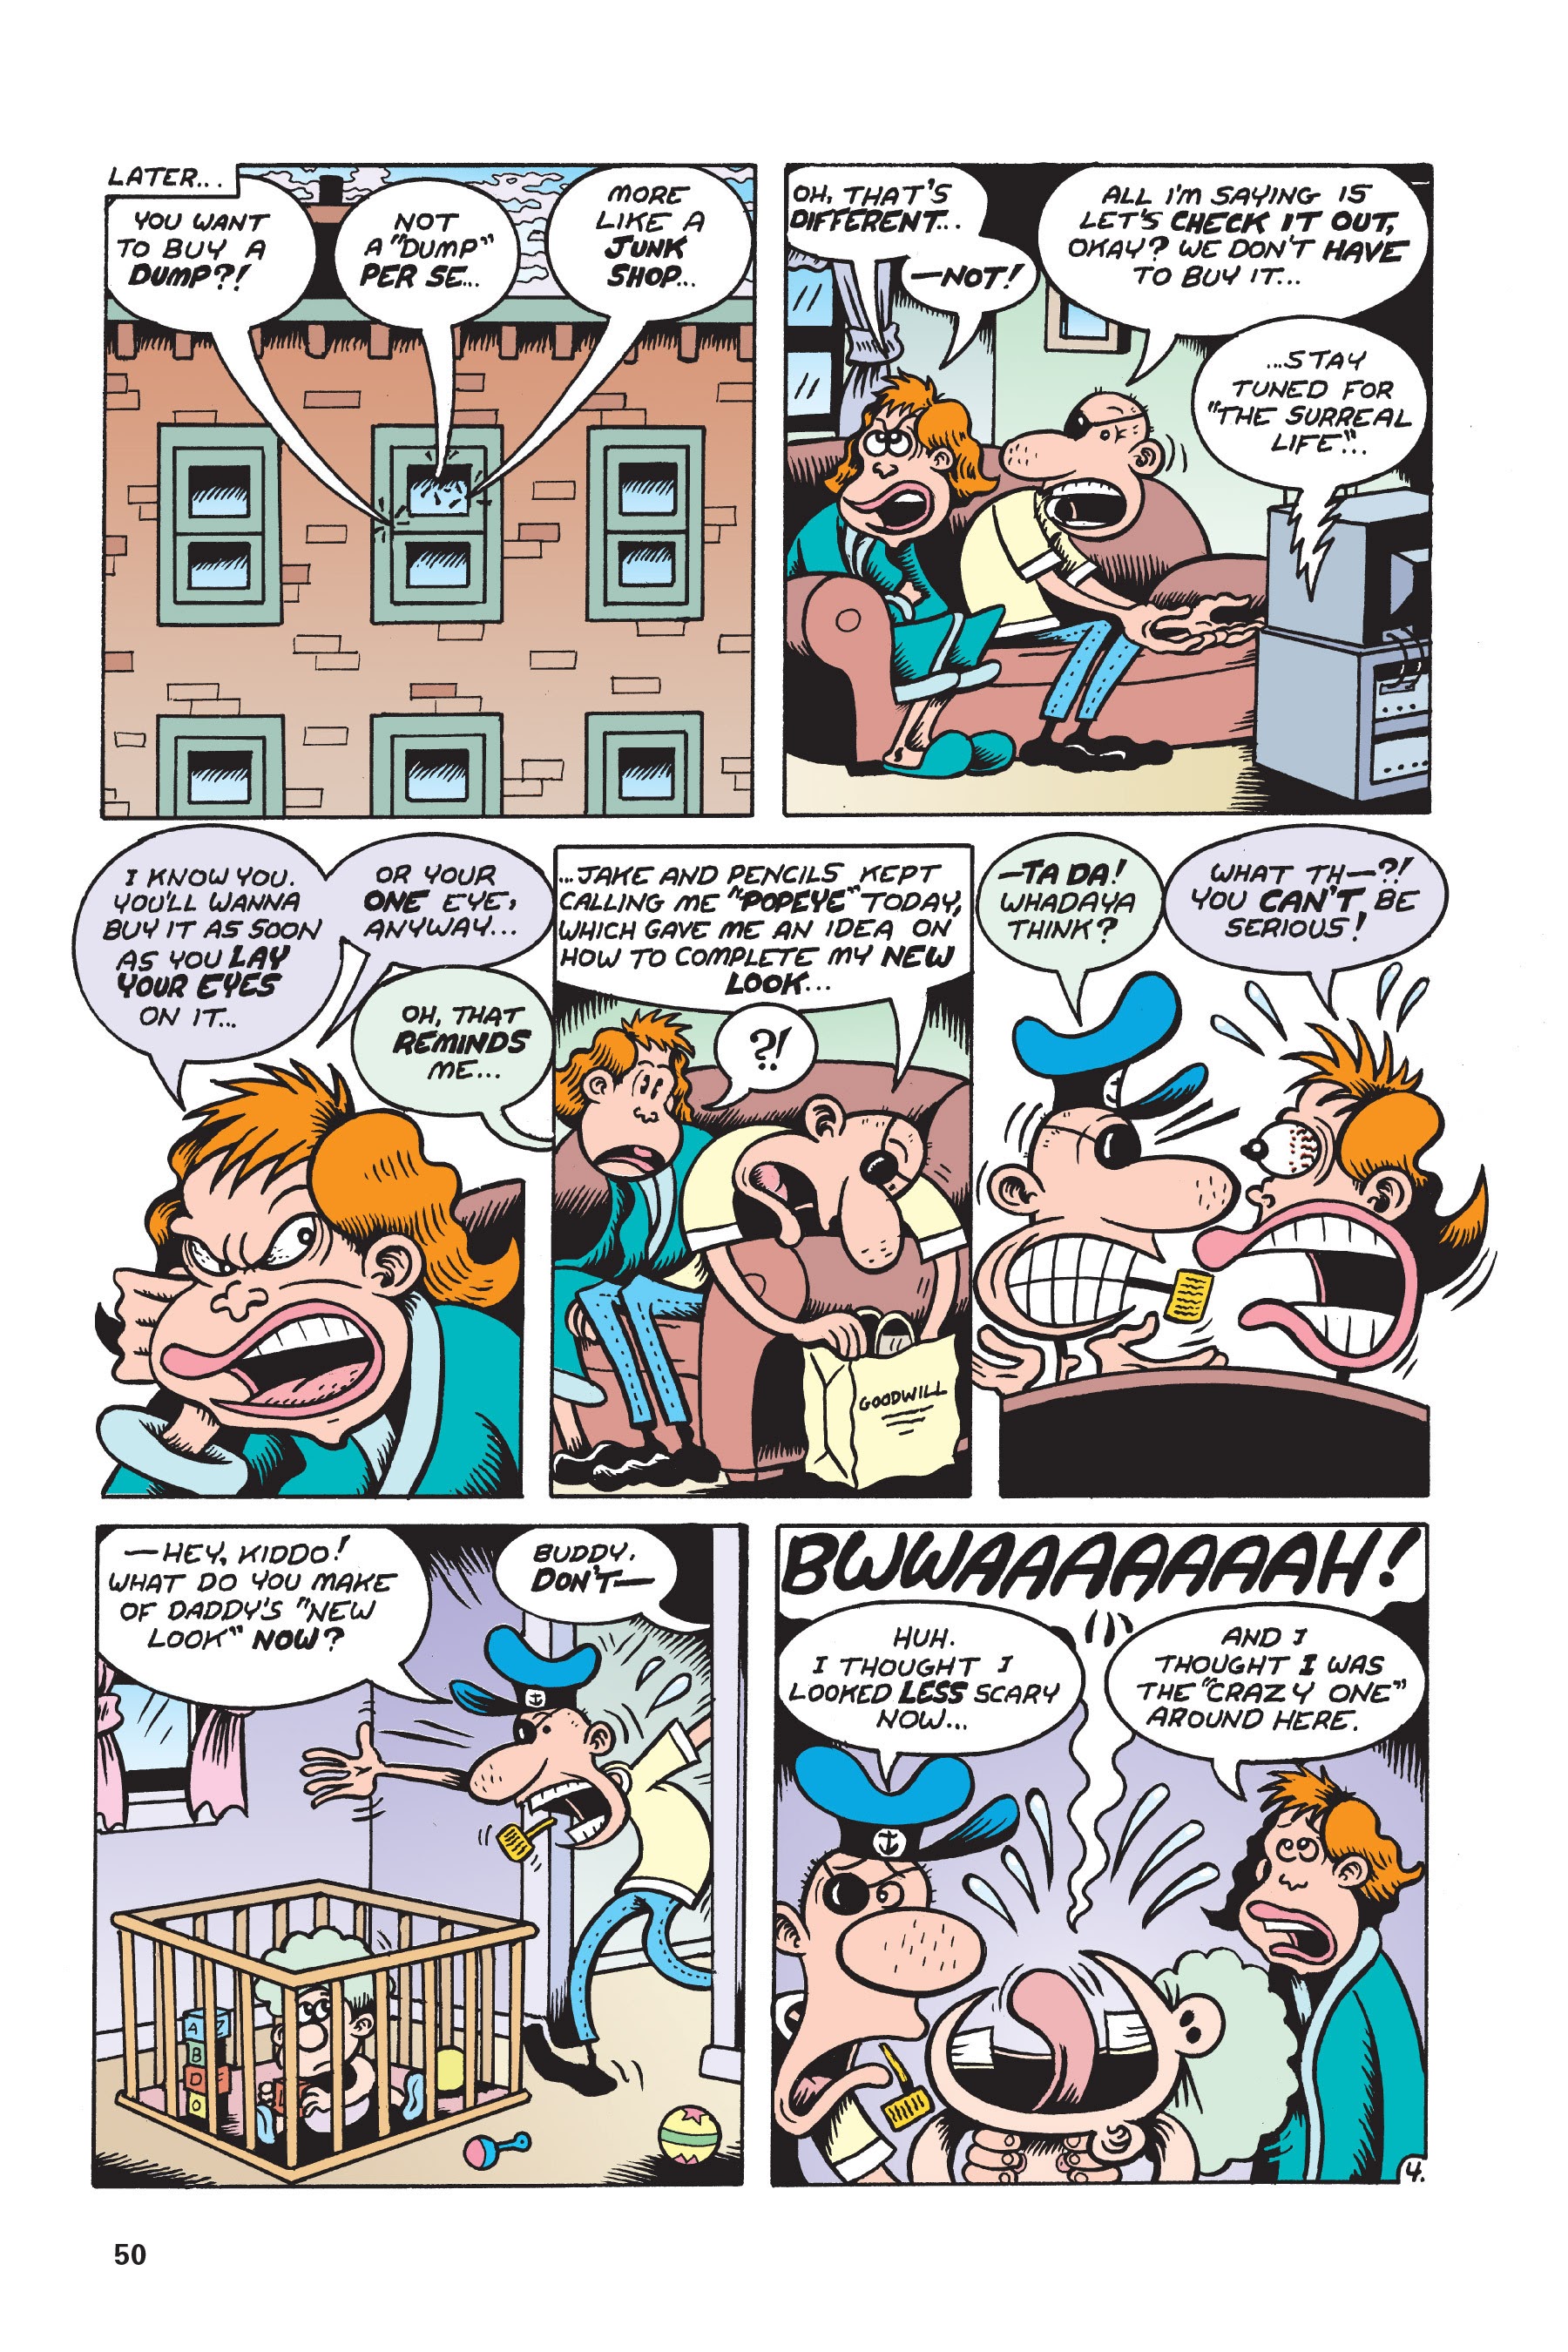 Read online Buddy Buys a Dump comic -  Issue # TPB - 50